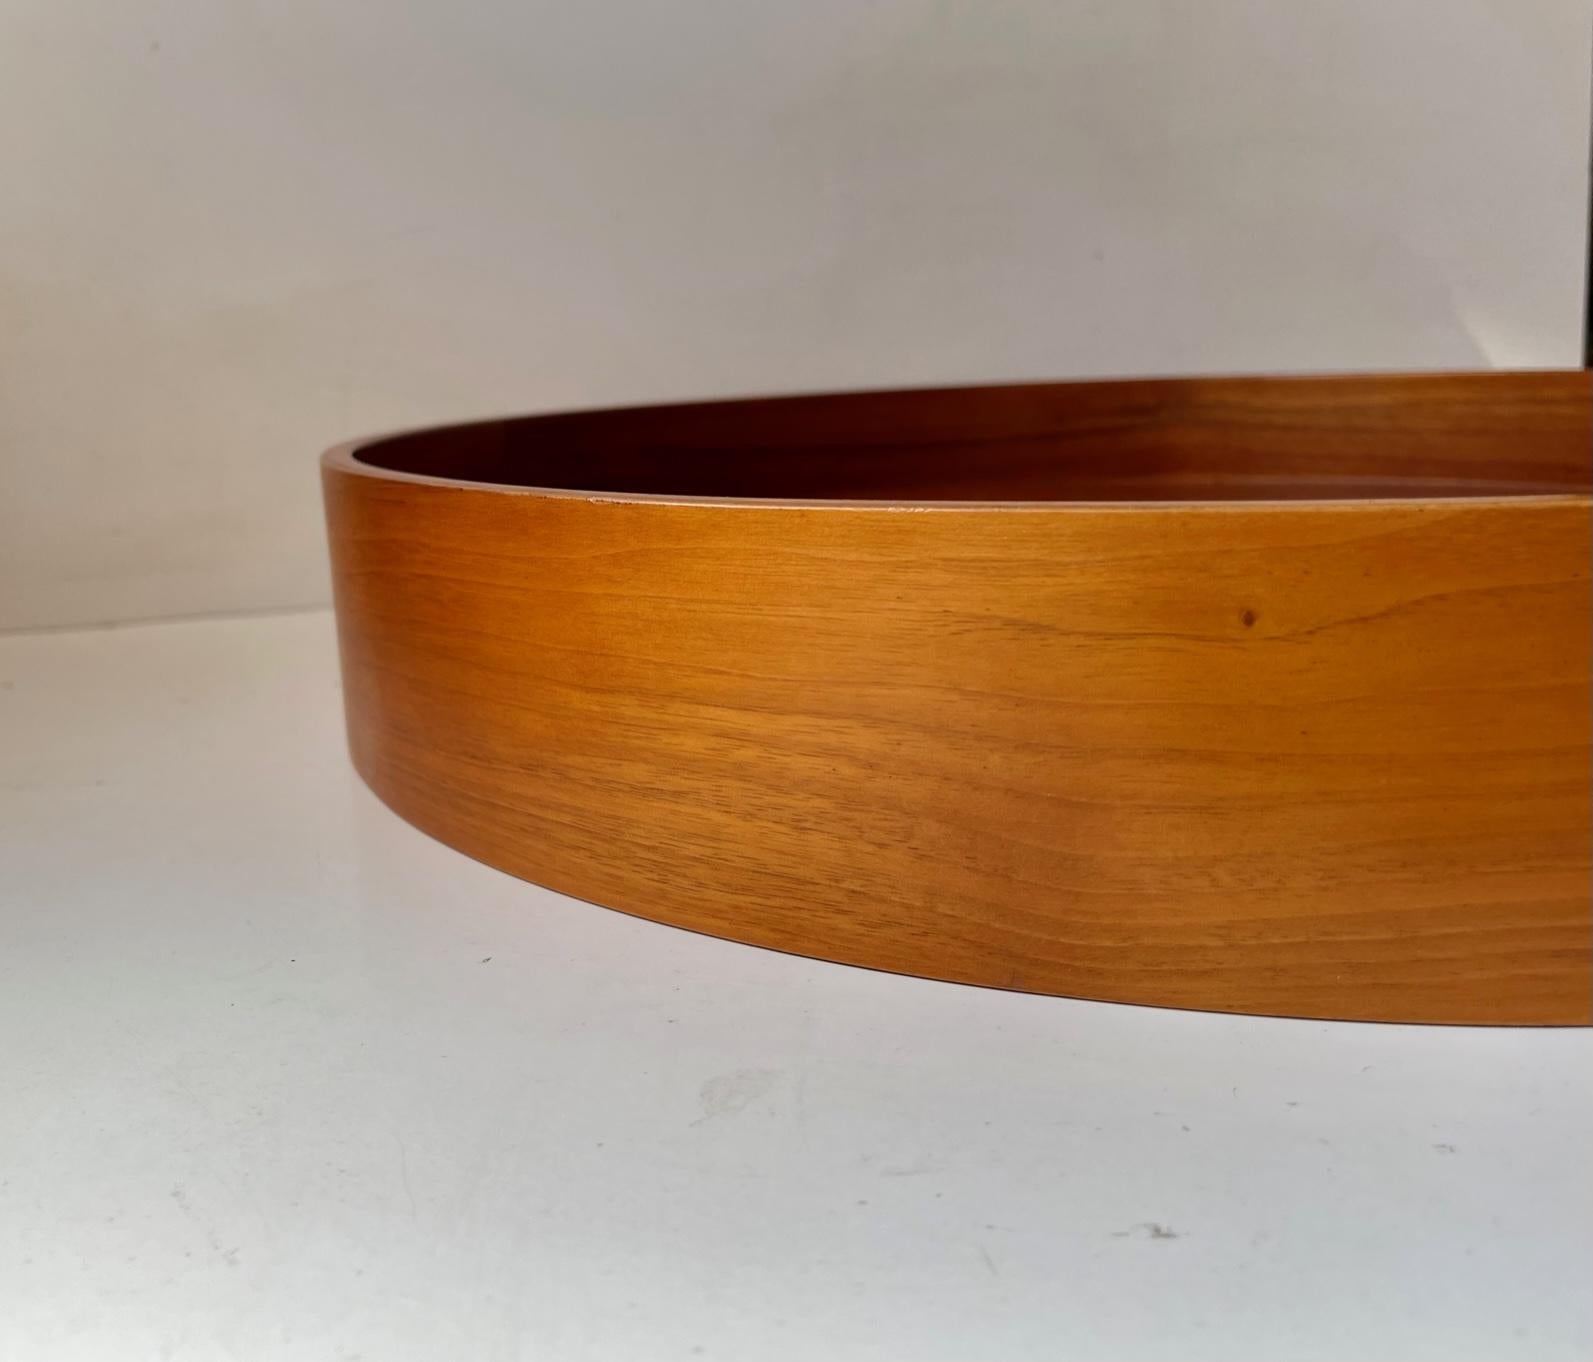 A beautifully crafted large round tray in form-pressed teak assembled without the use of metal. It has two useable sides. A side with high edge and a side with a more shallow edge. It was made in Sweden during the 1960s and the design is attributed